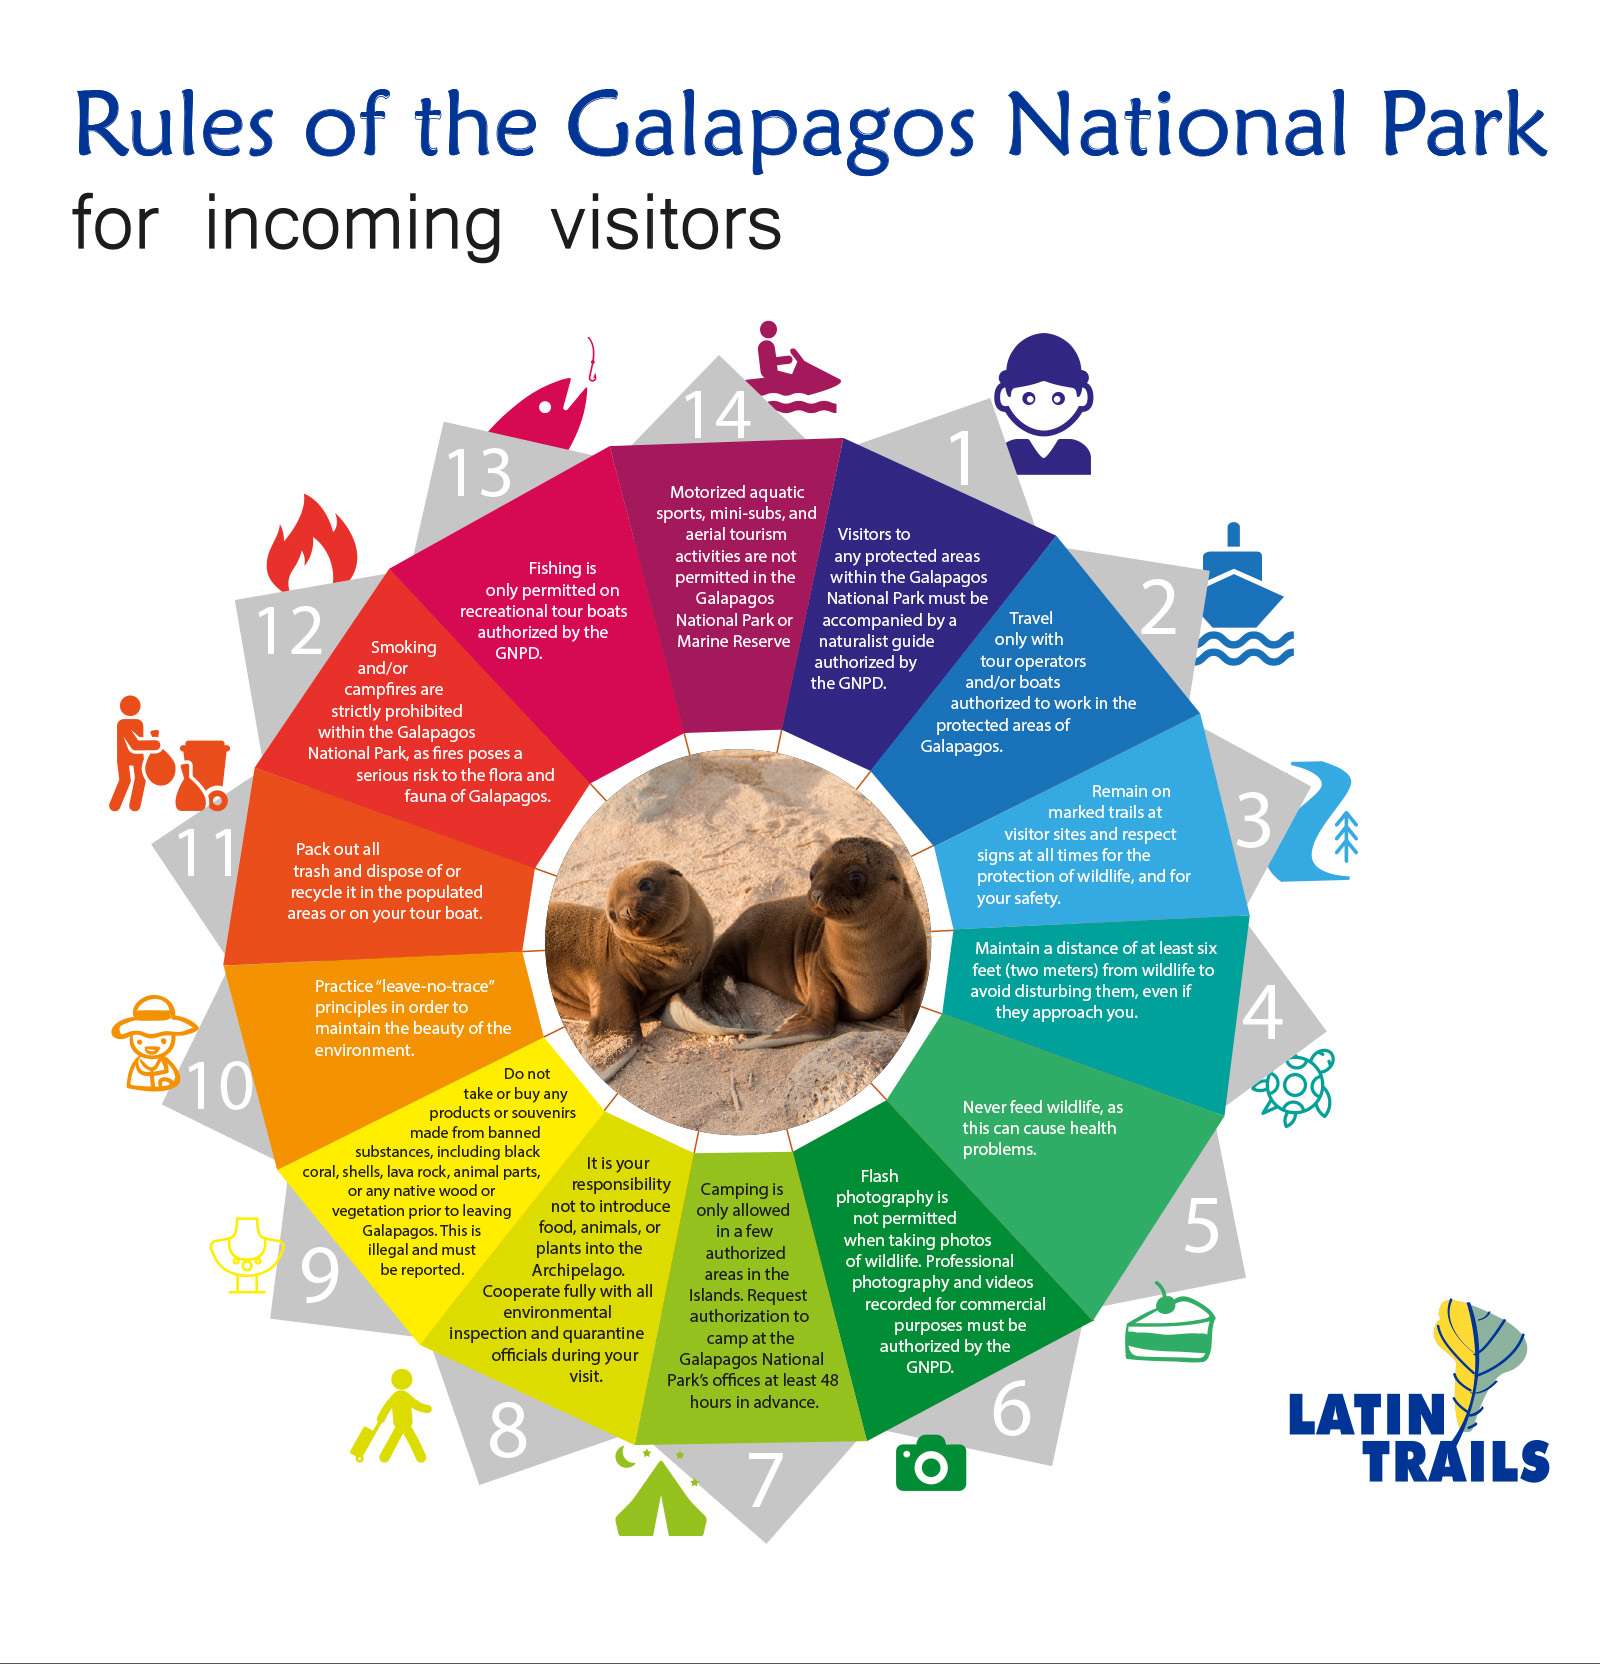 Rules of the Galapagos National Park